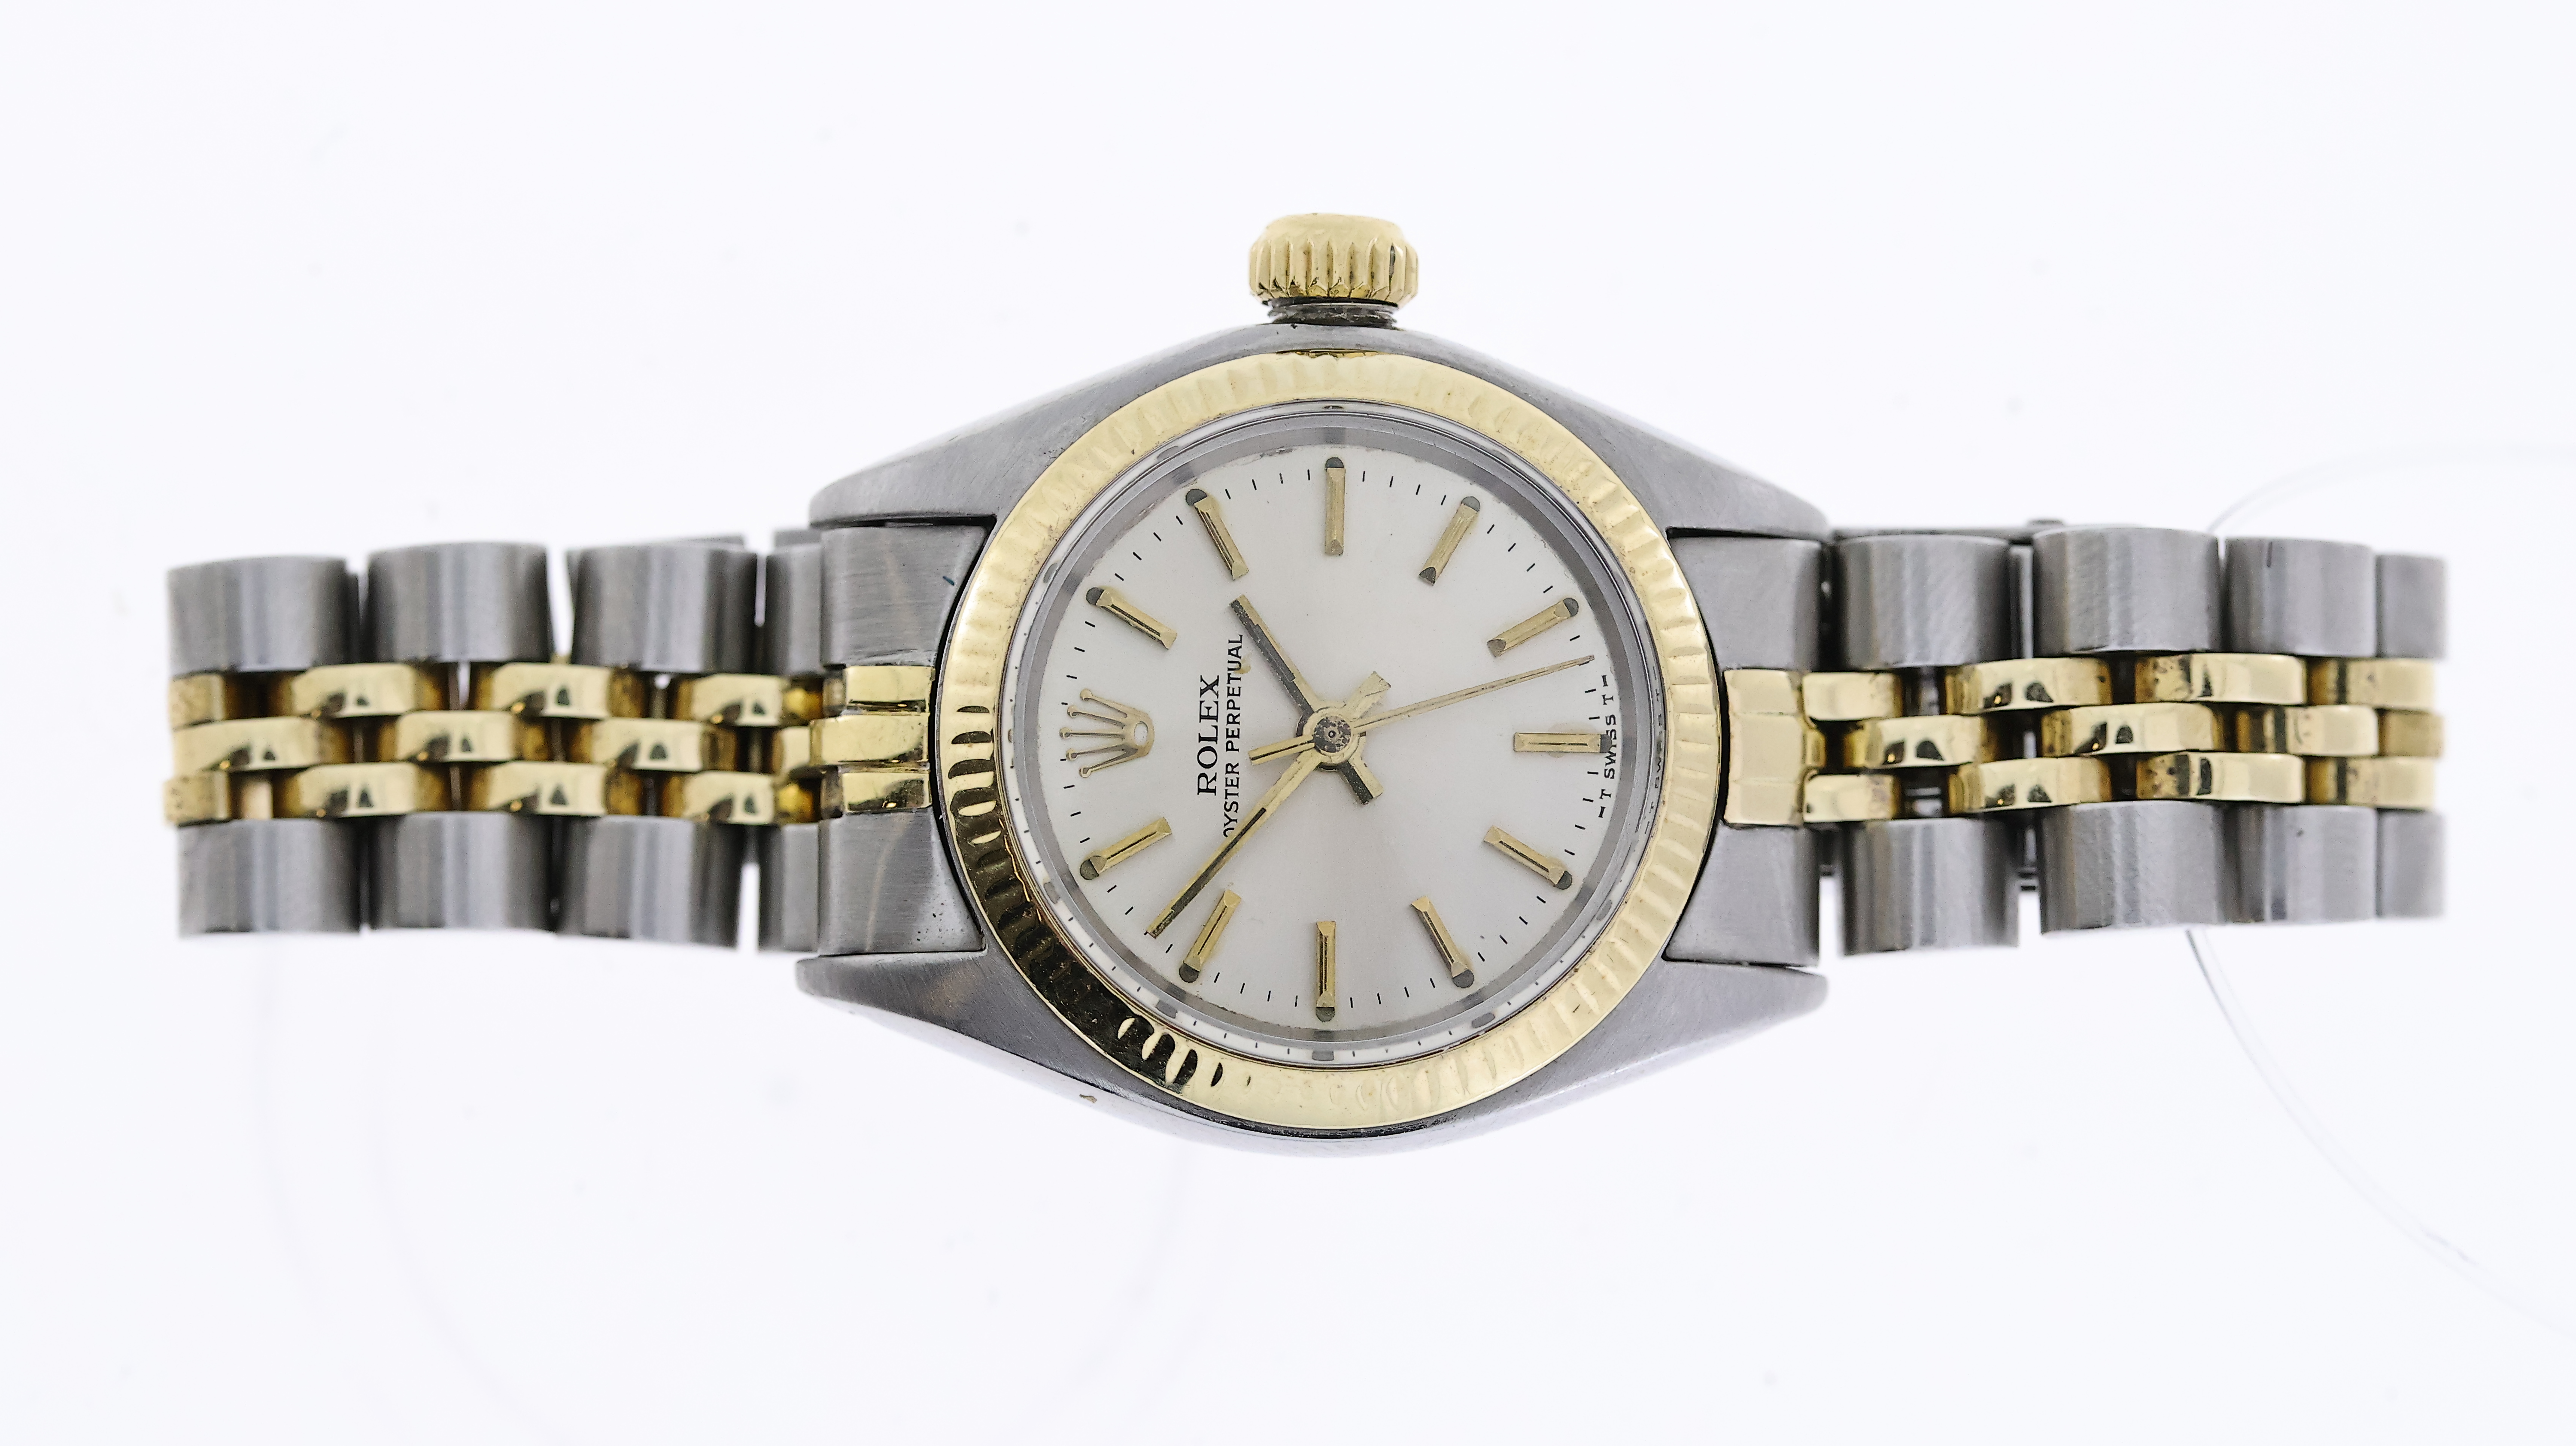 LADIES ROLEX OYSTER PERPETUAL REFERENCE 6719 CIRCA 1978, circular silver dial with baton hour